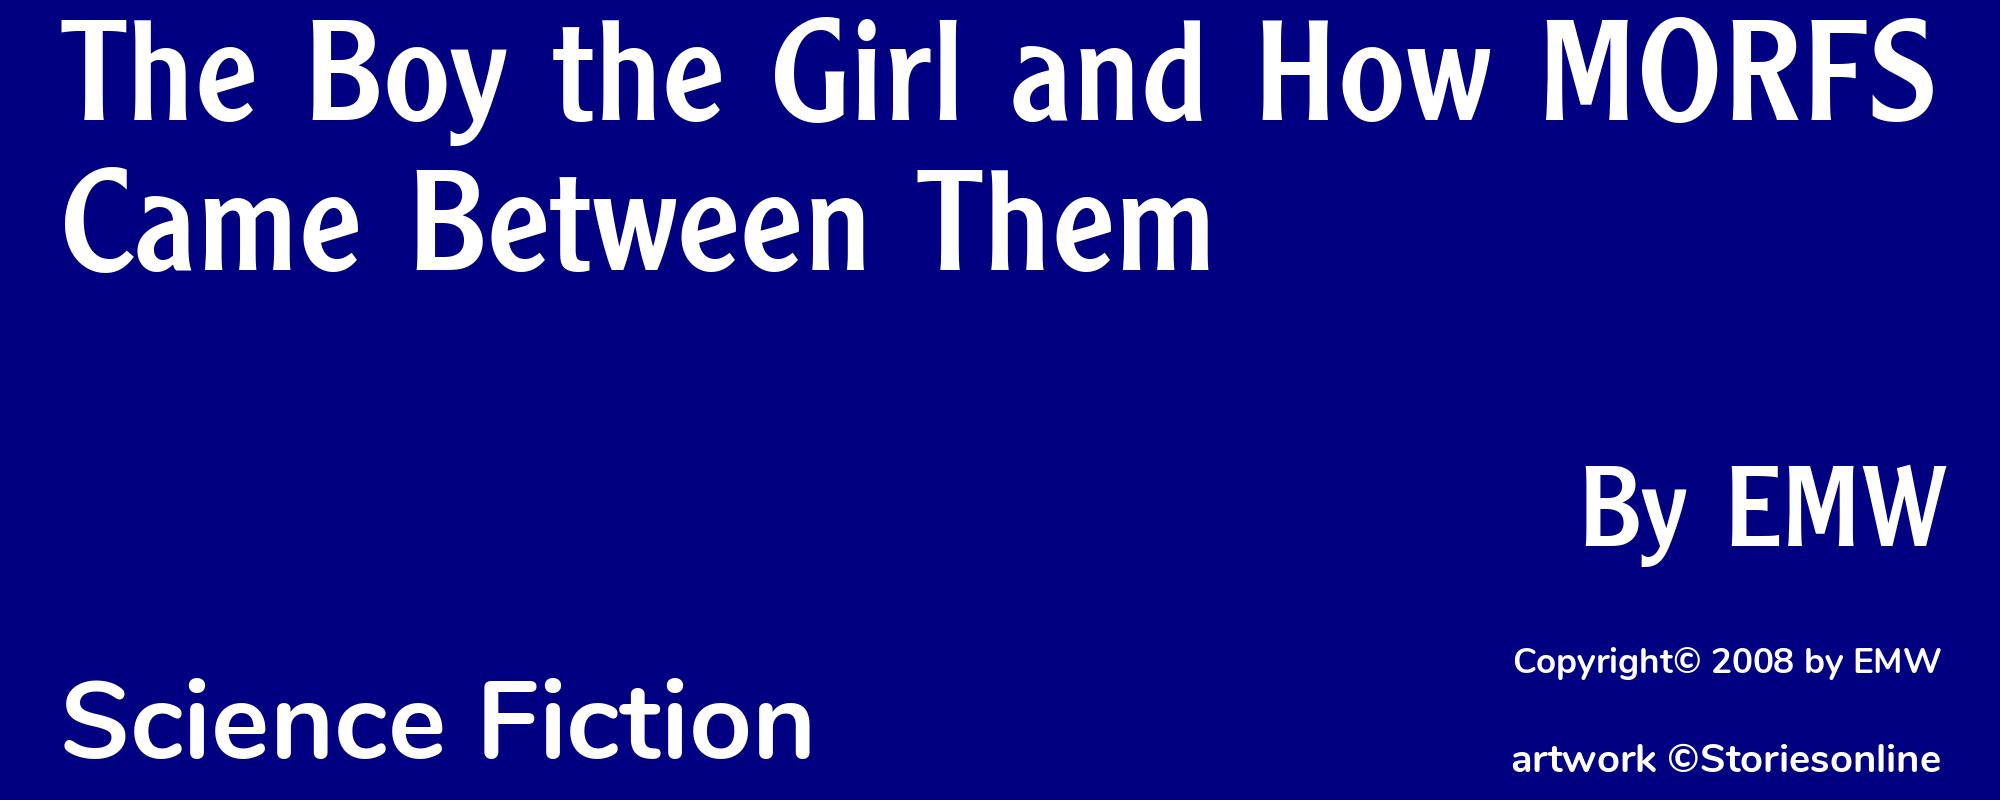 The Boy the Girl and How MORFS Came Between Them - Cover